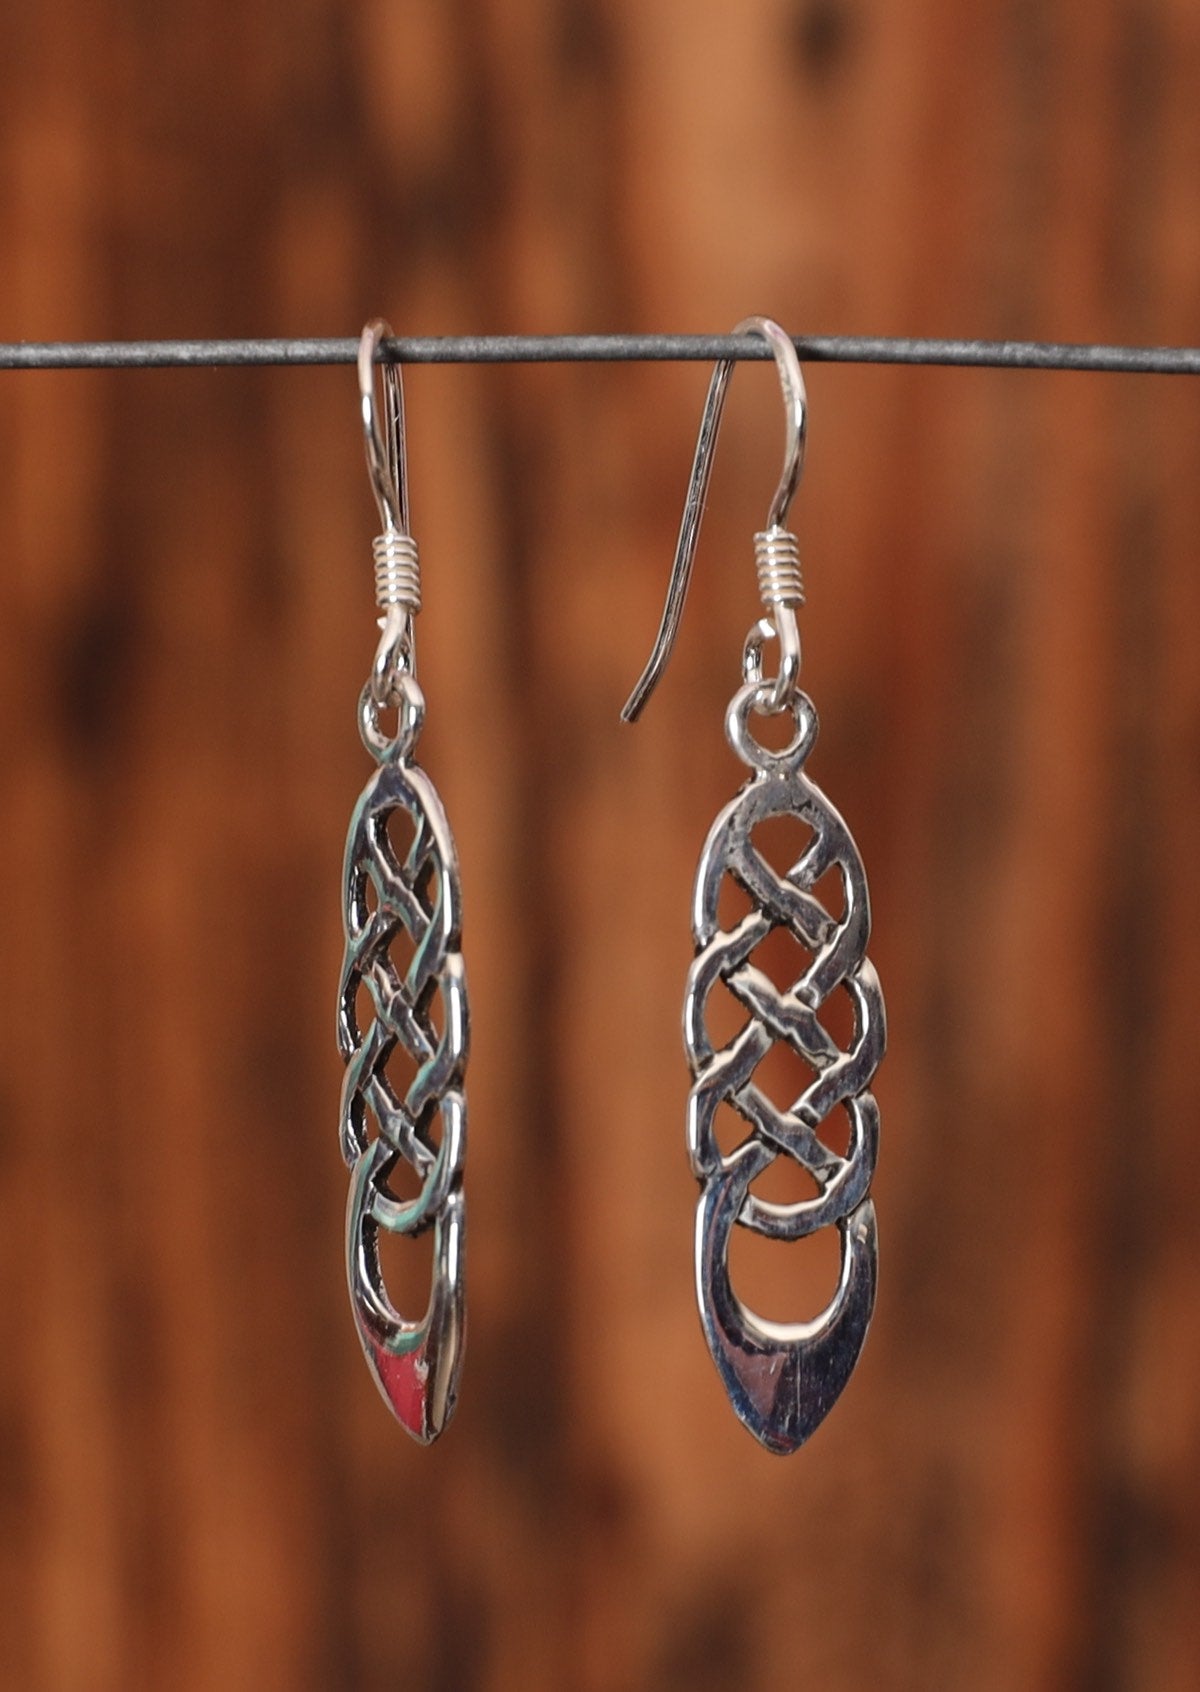 92.5% silver woven braid silver earrings sit on a wire for display.